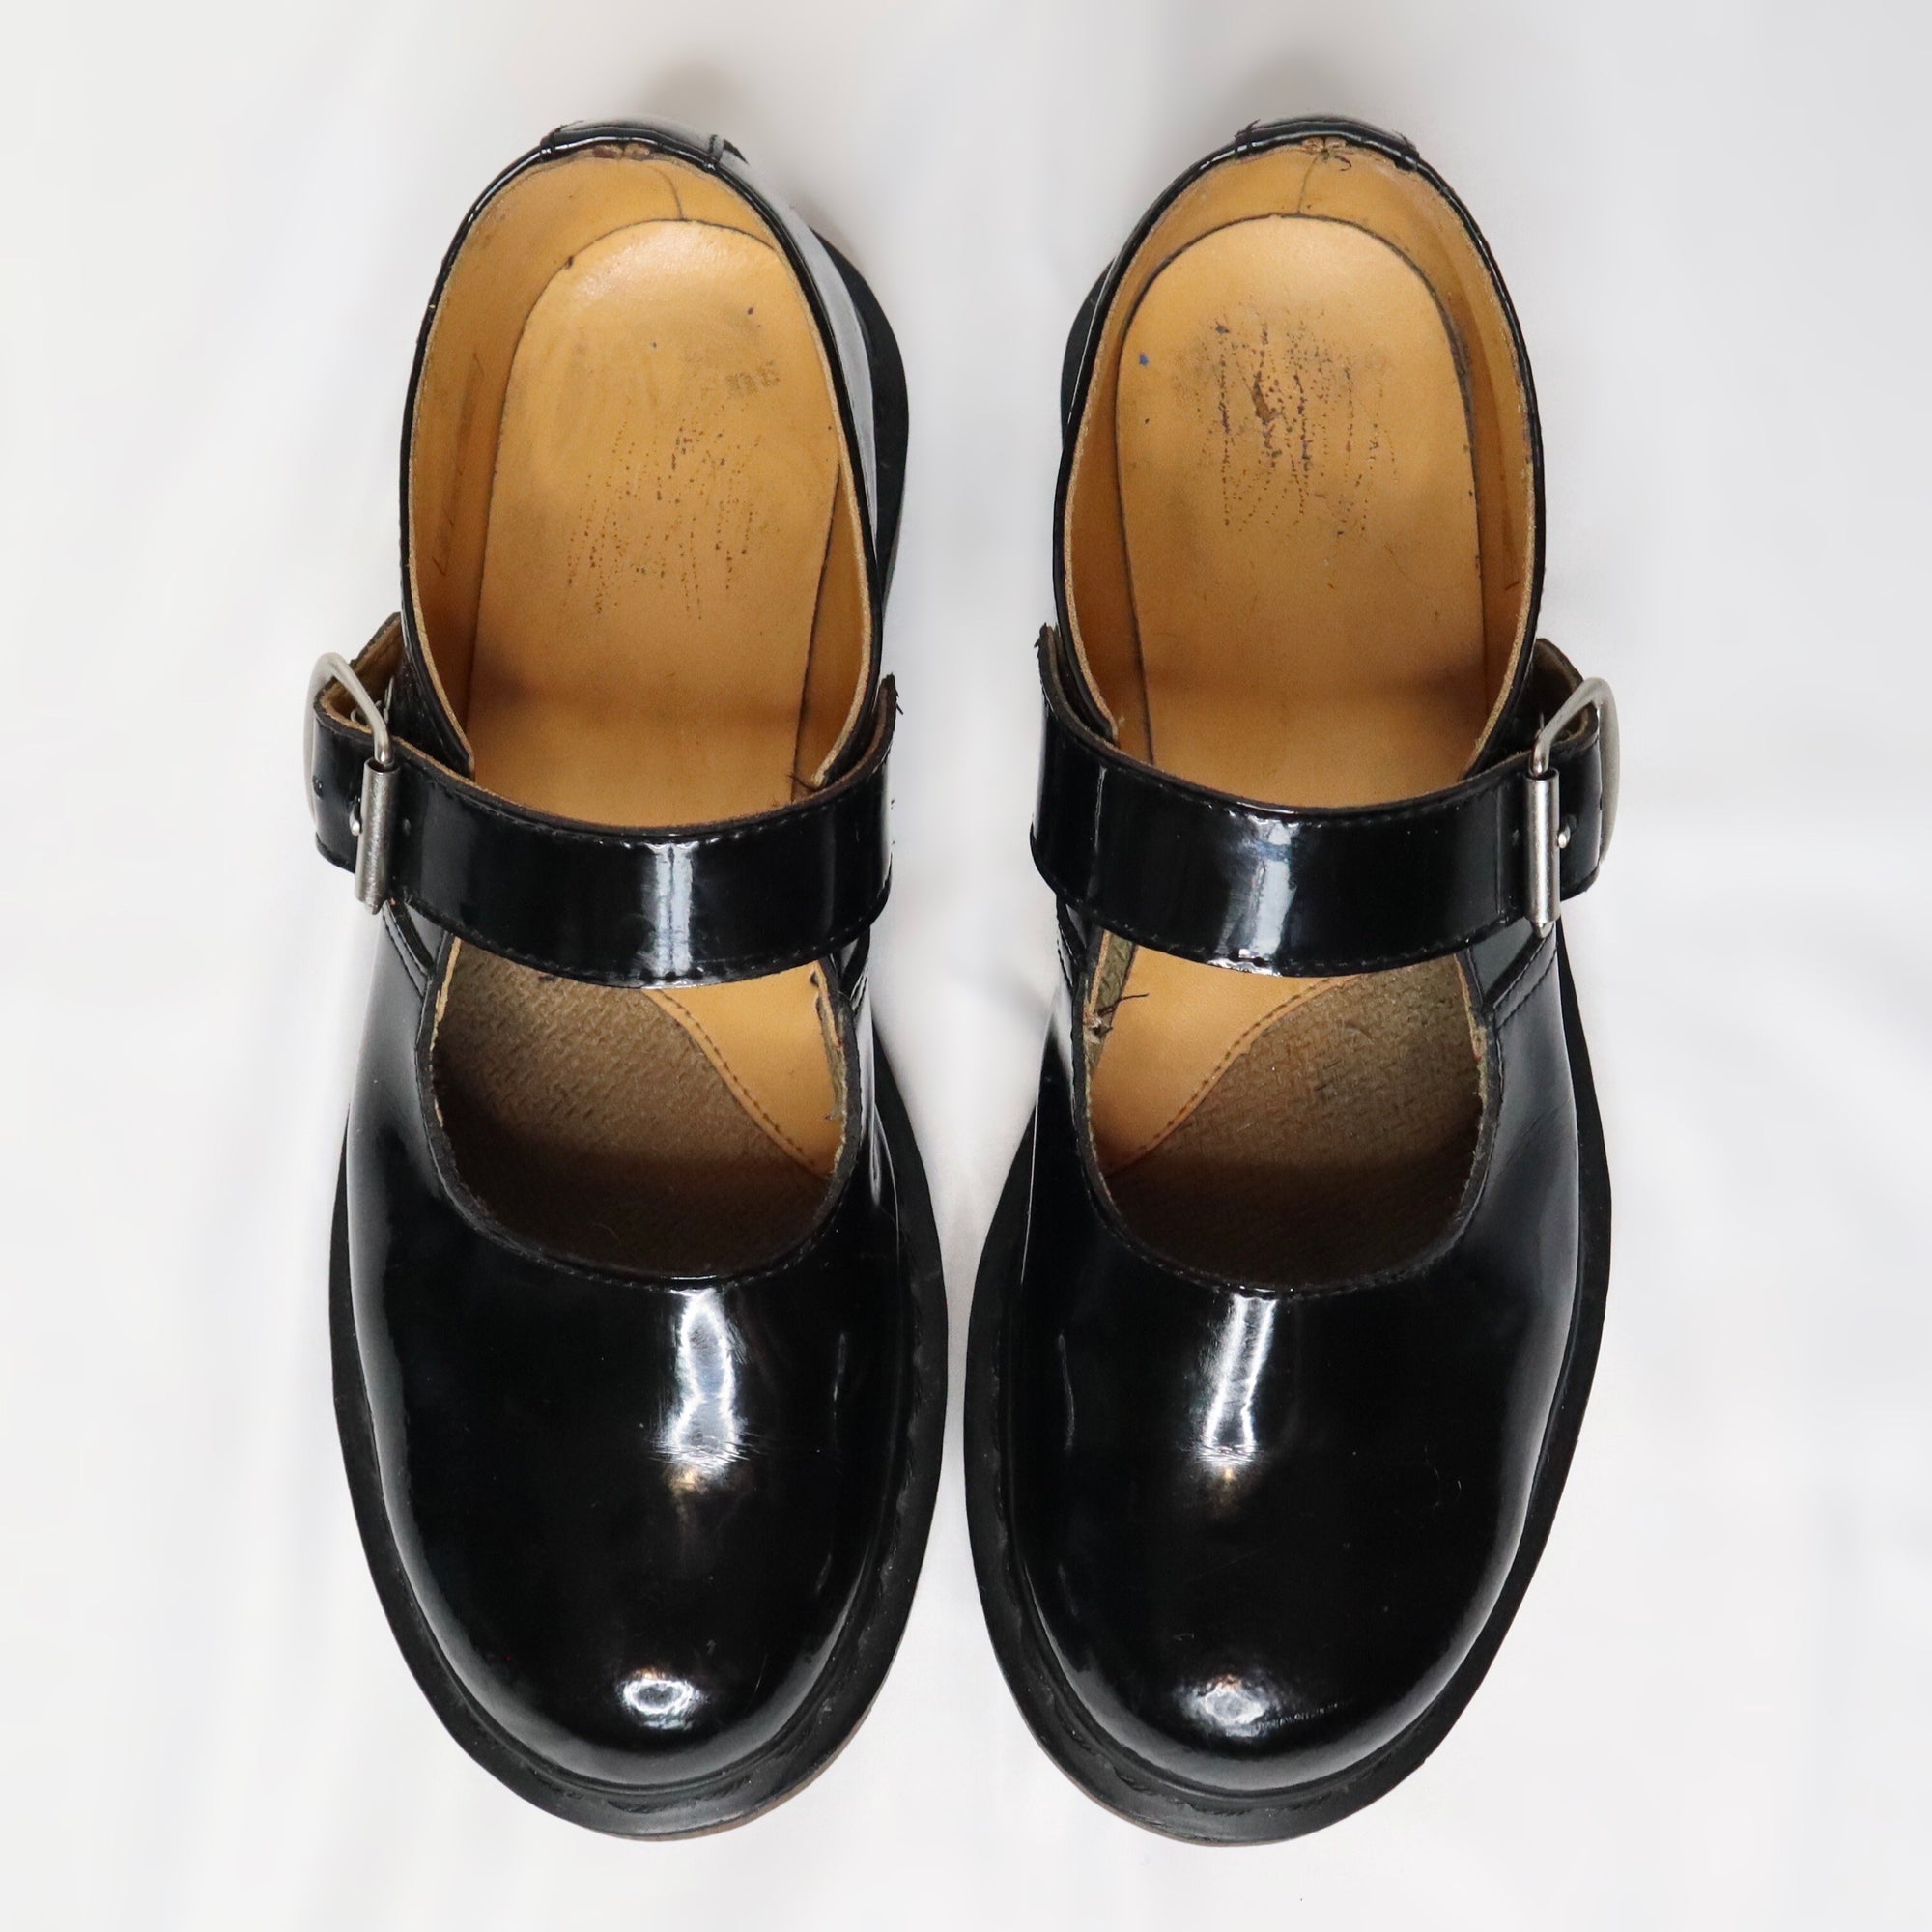 Dr Martens Black Mary Janes 